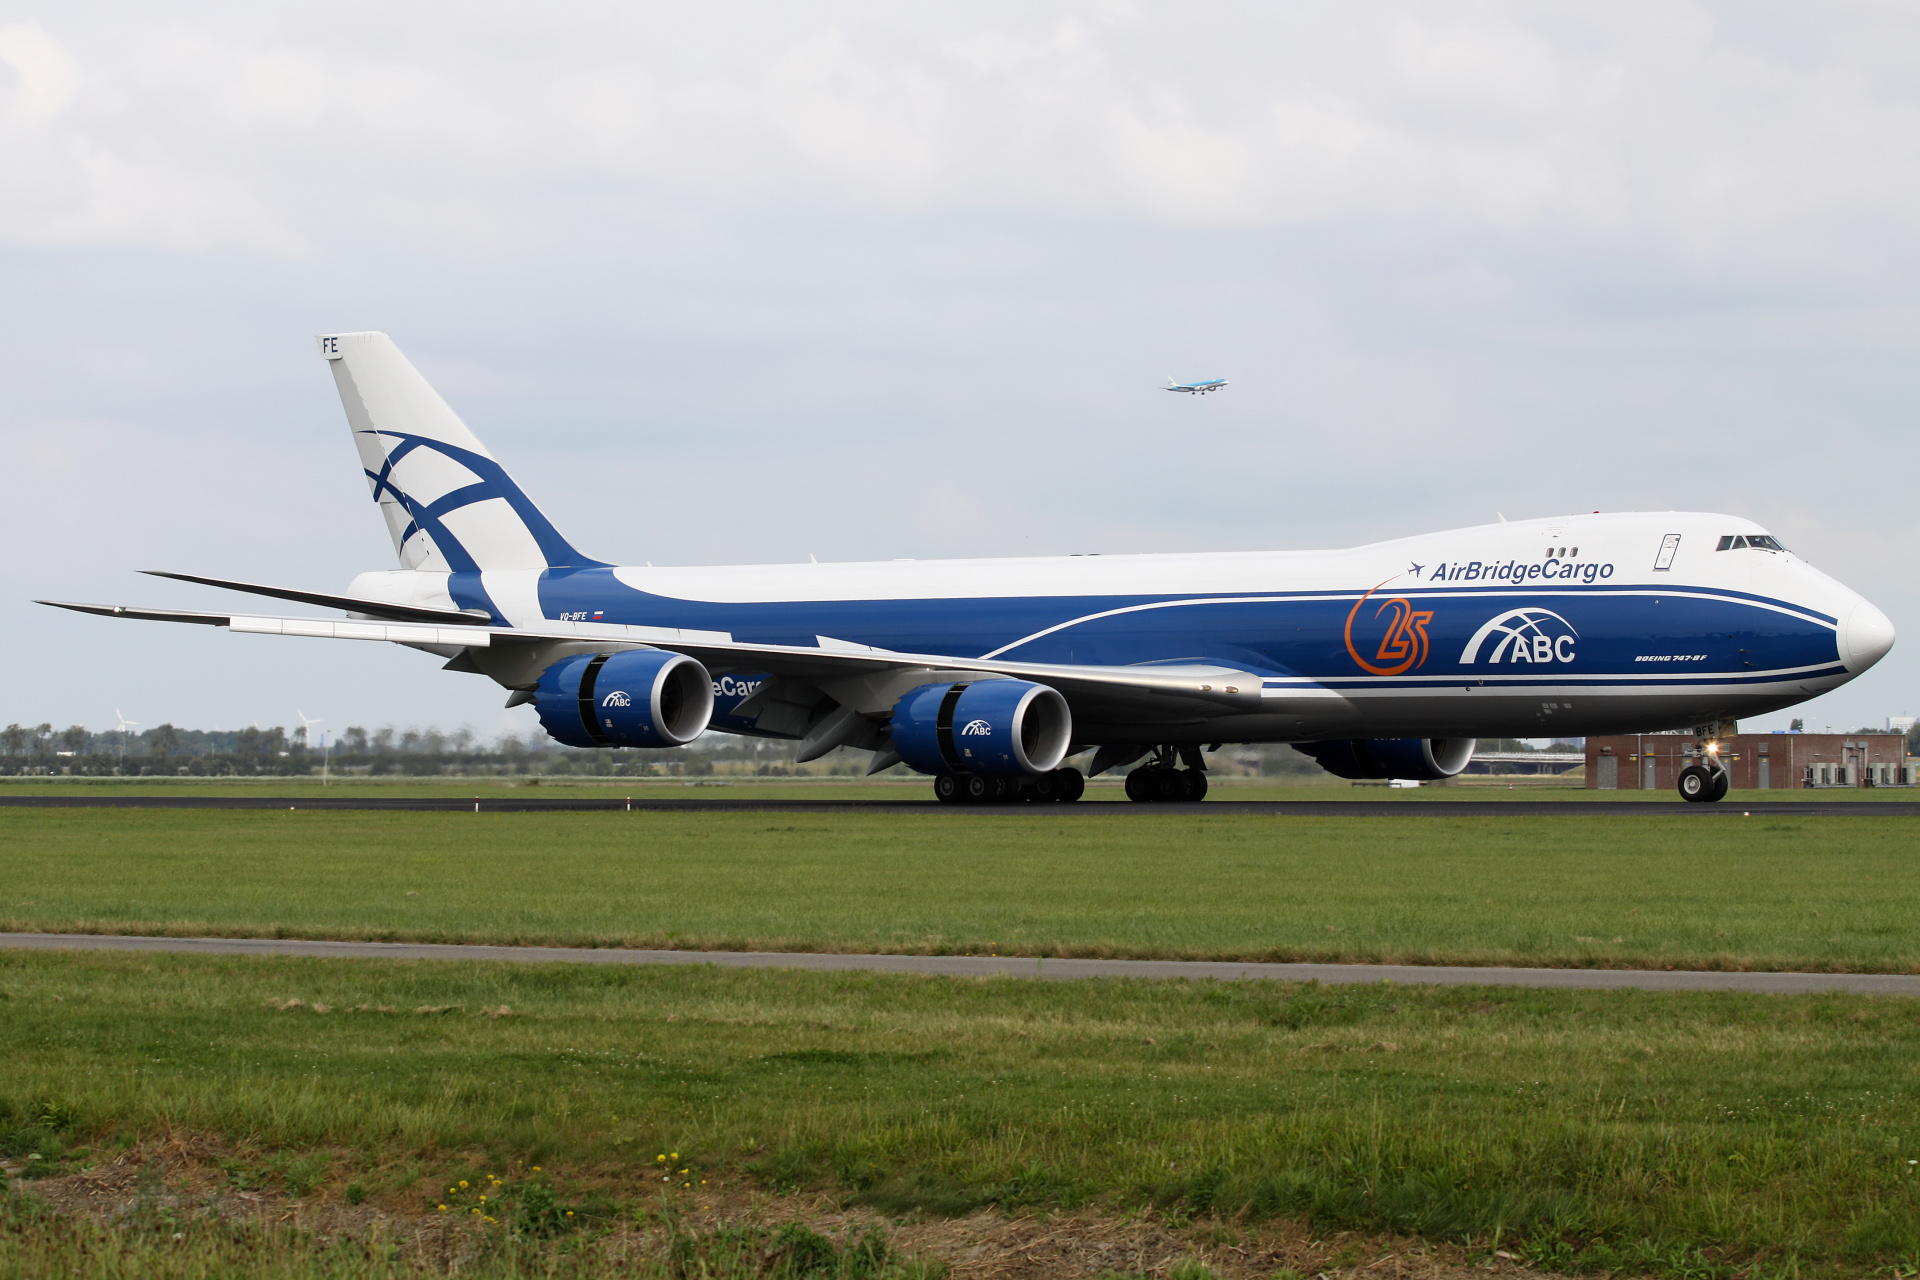 VQ-BFE (25 years livery) (Aircraft » Schiphol Spotting » Boeing 747-8F » AirBridgeCargo Airlines)